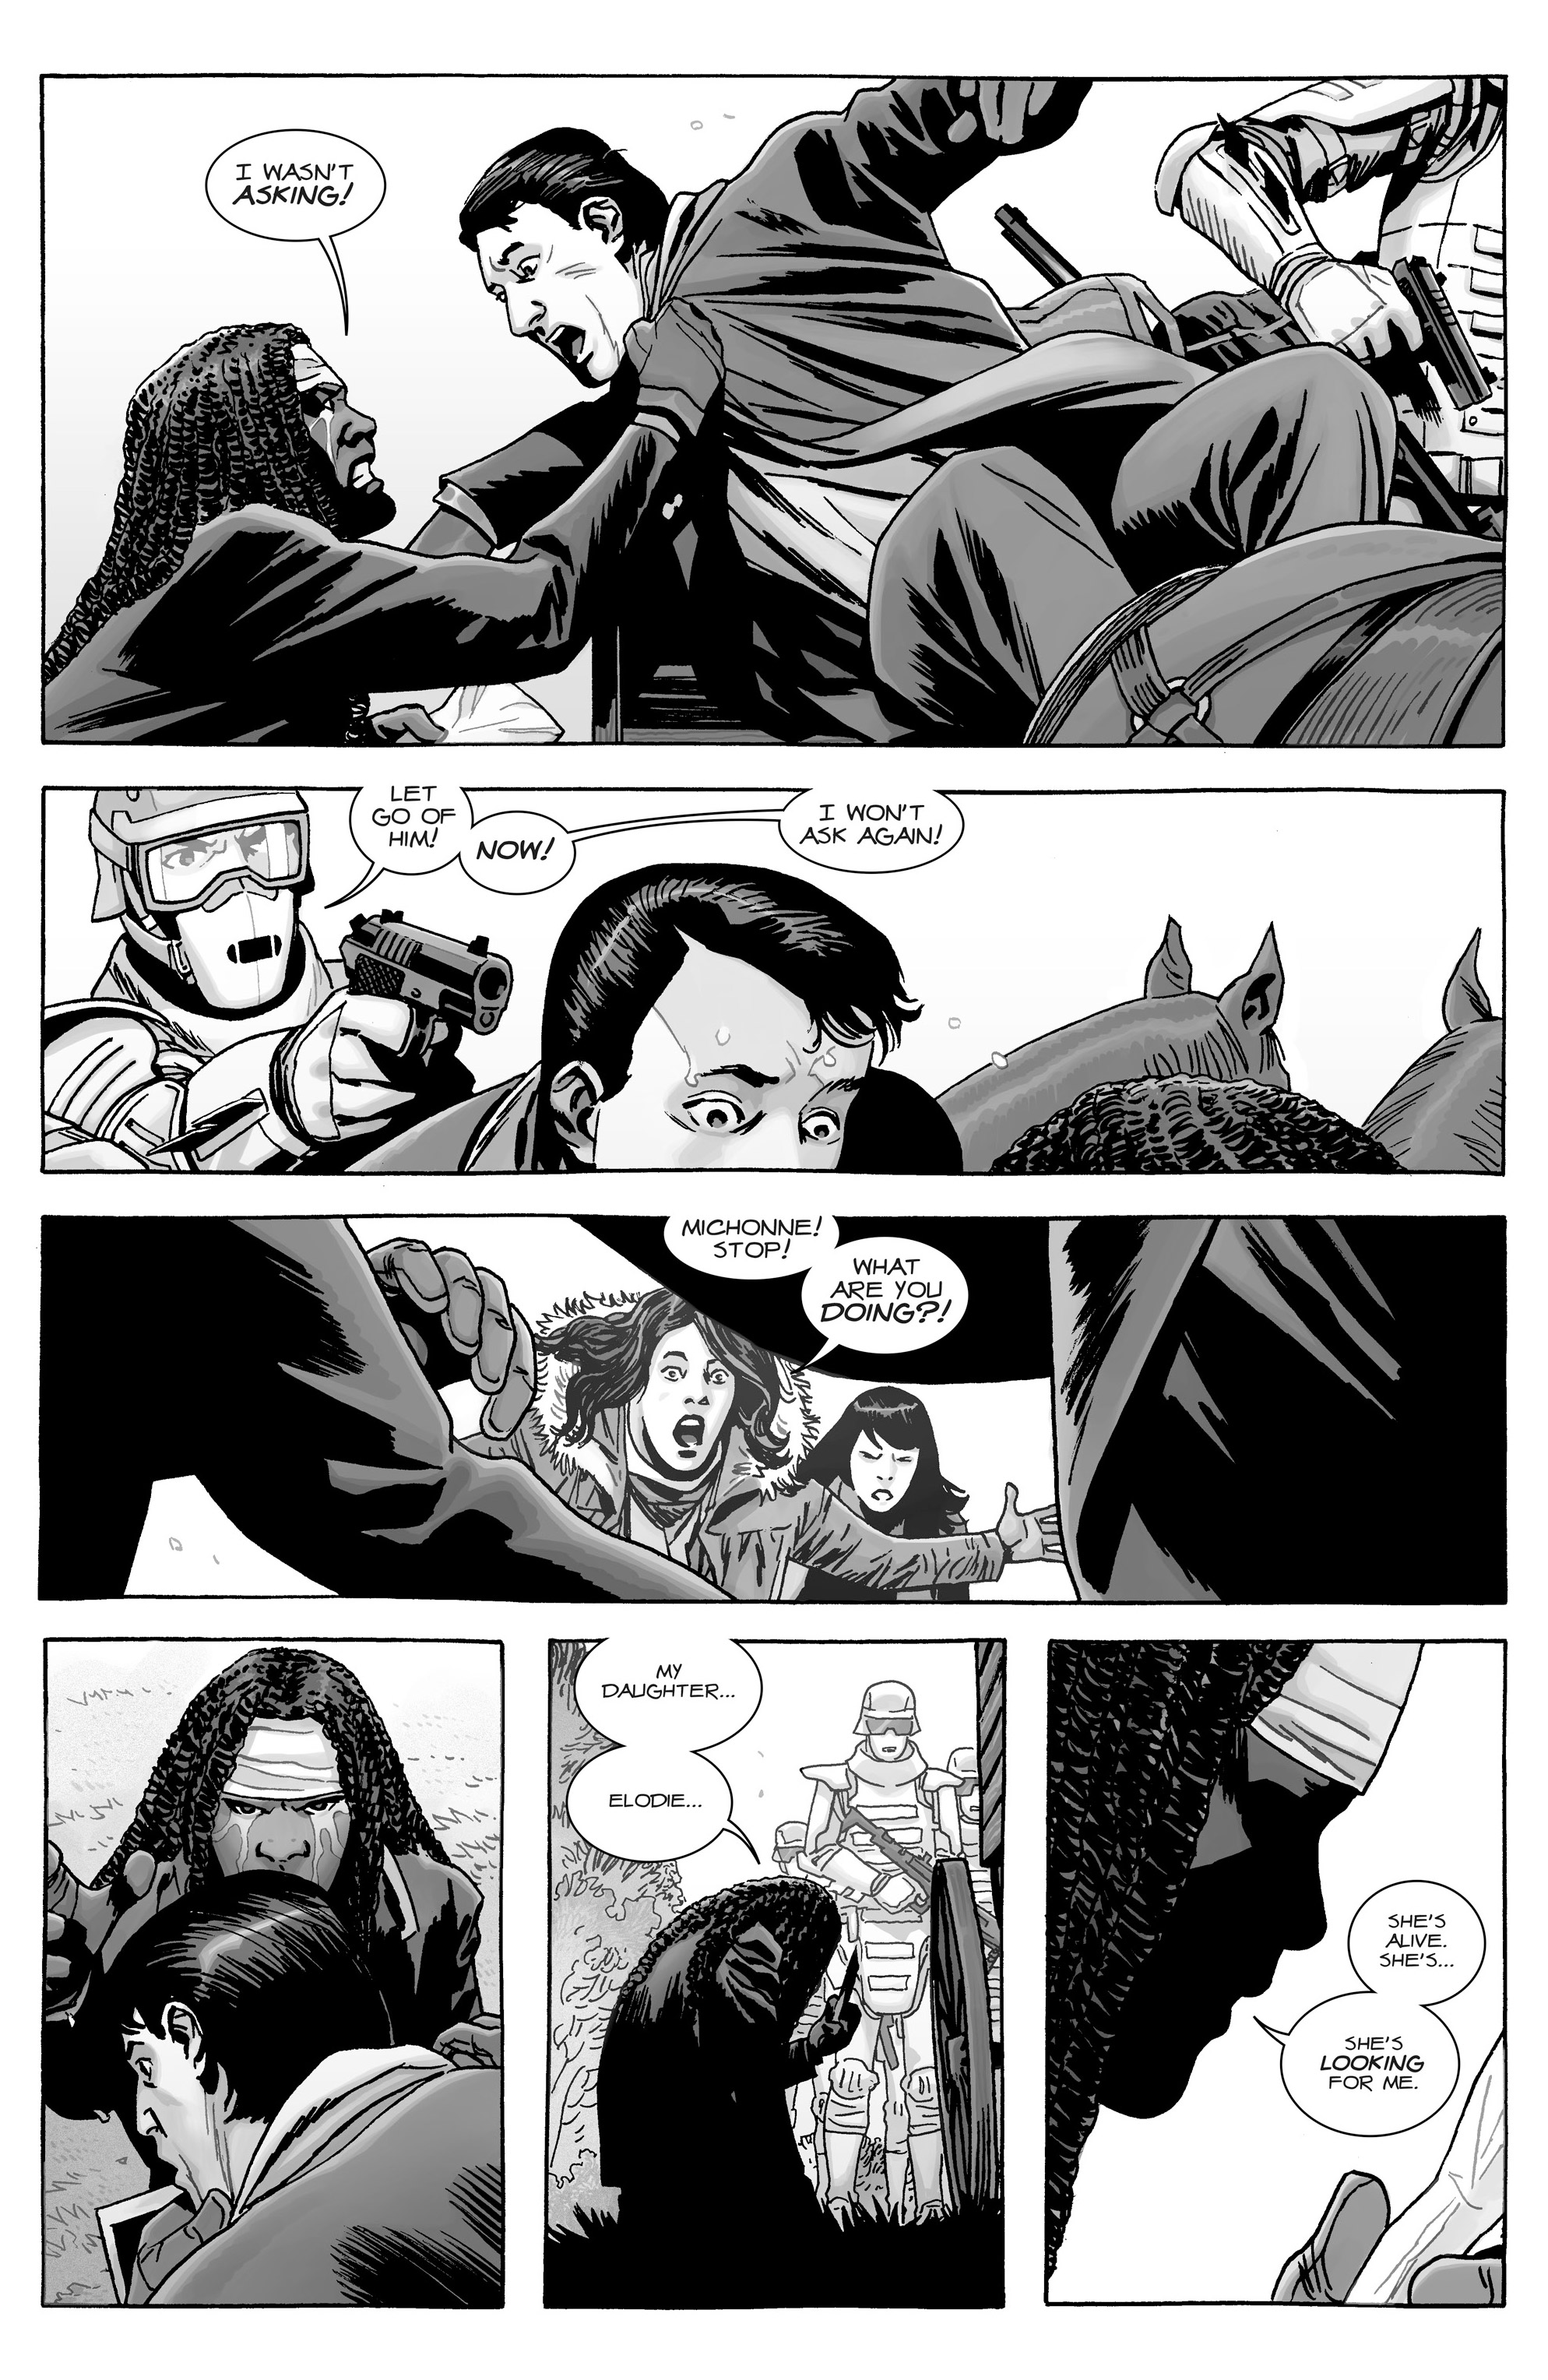 The Walking Dead (2003-): Chapter 176 - Page 4